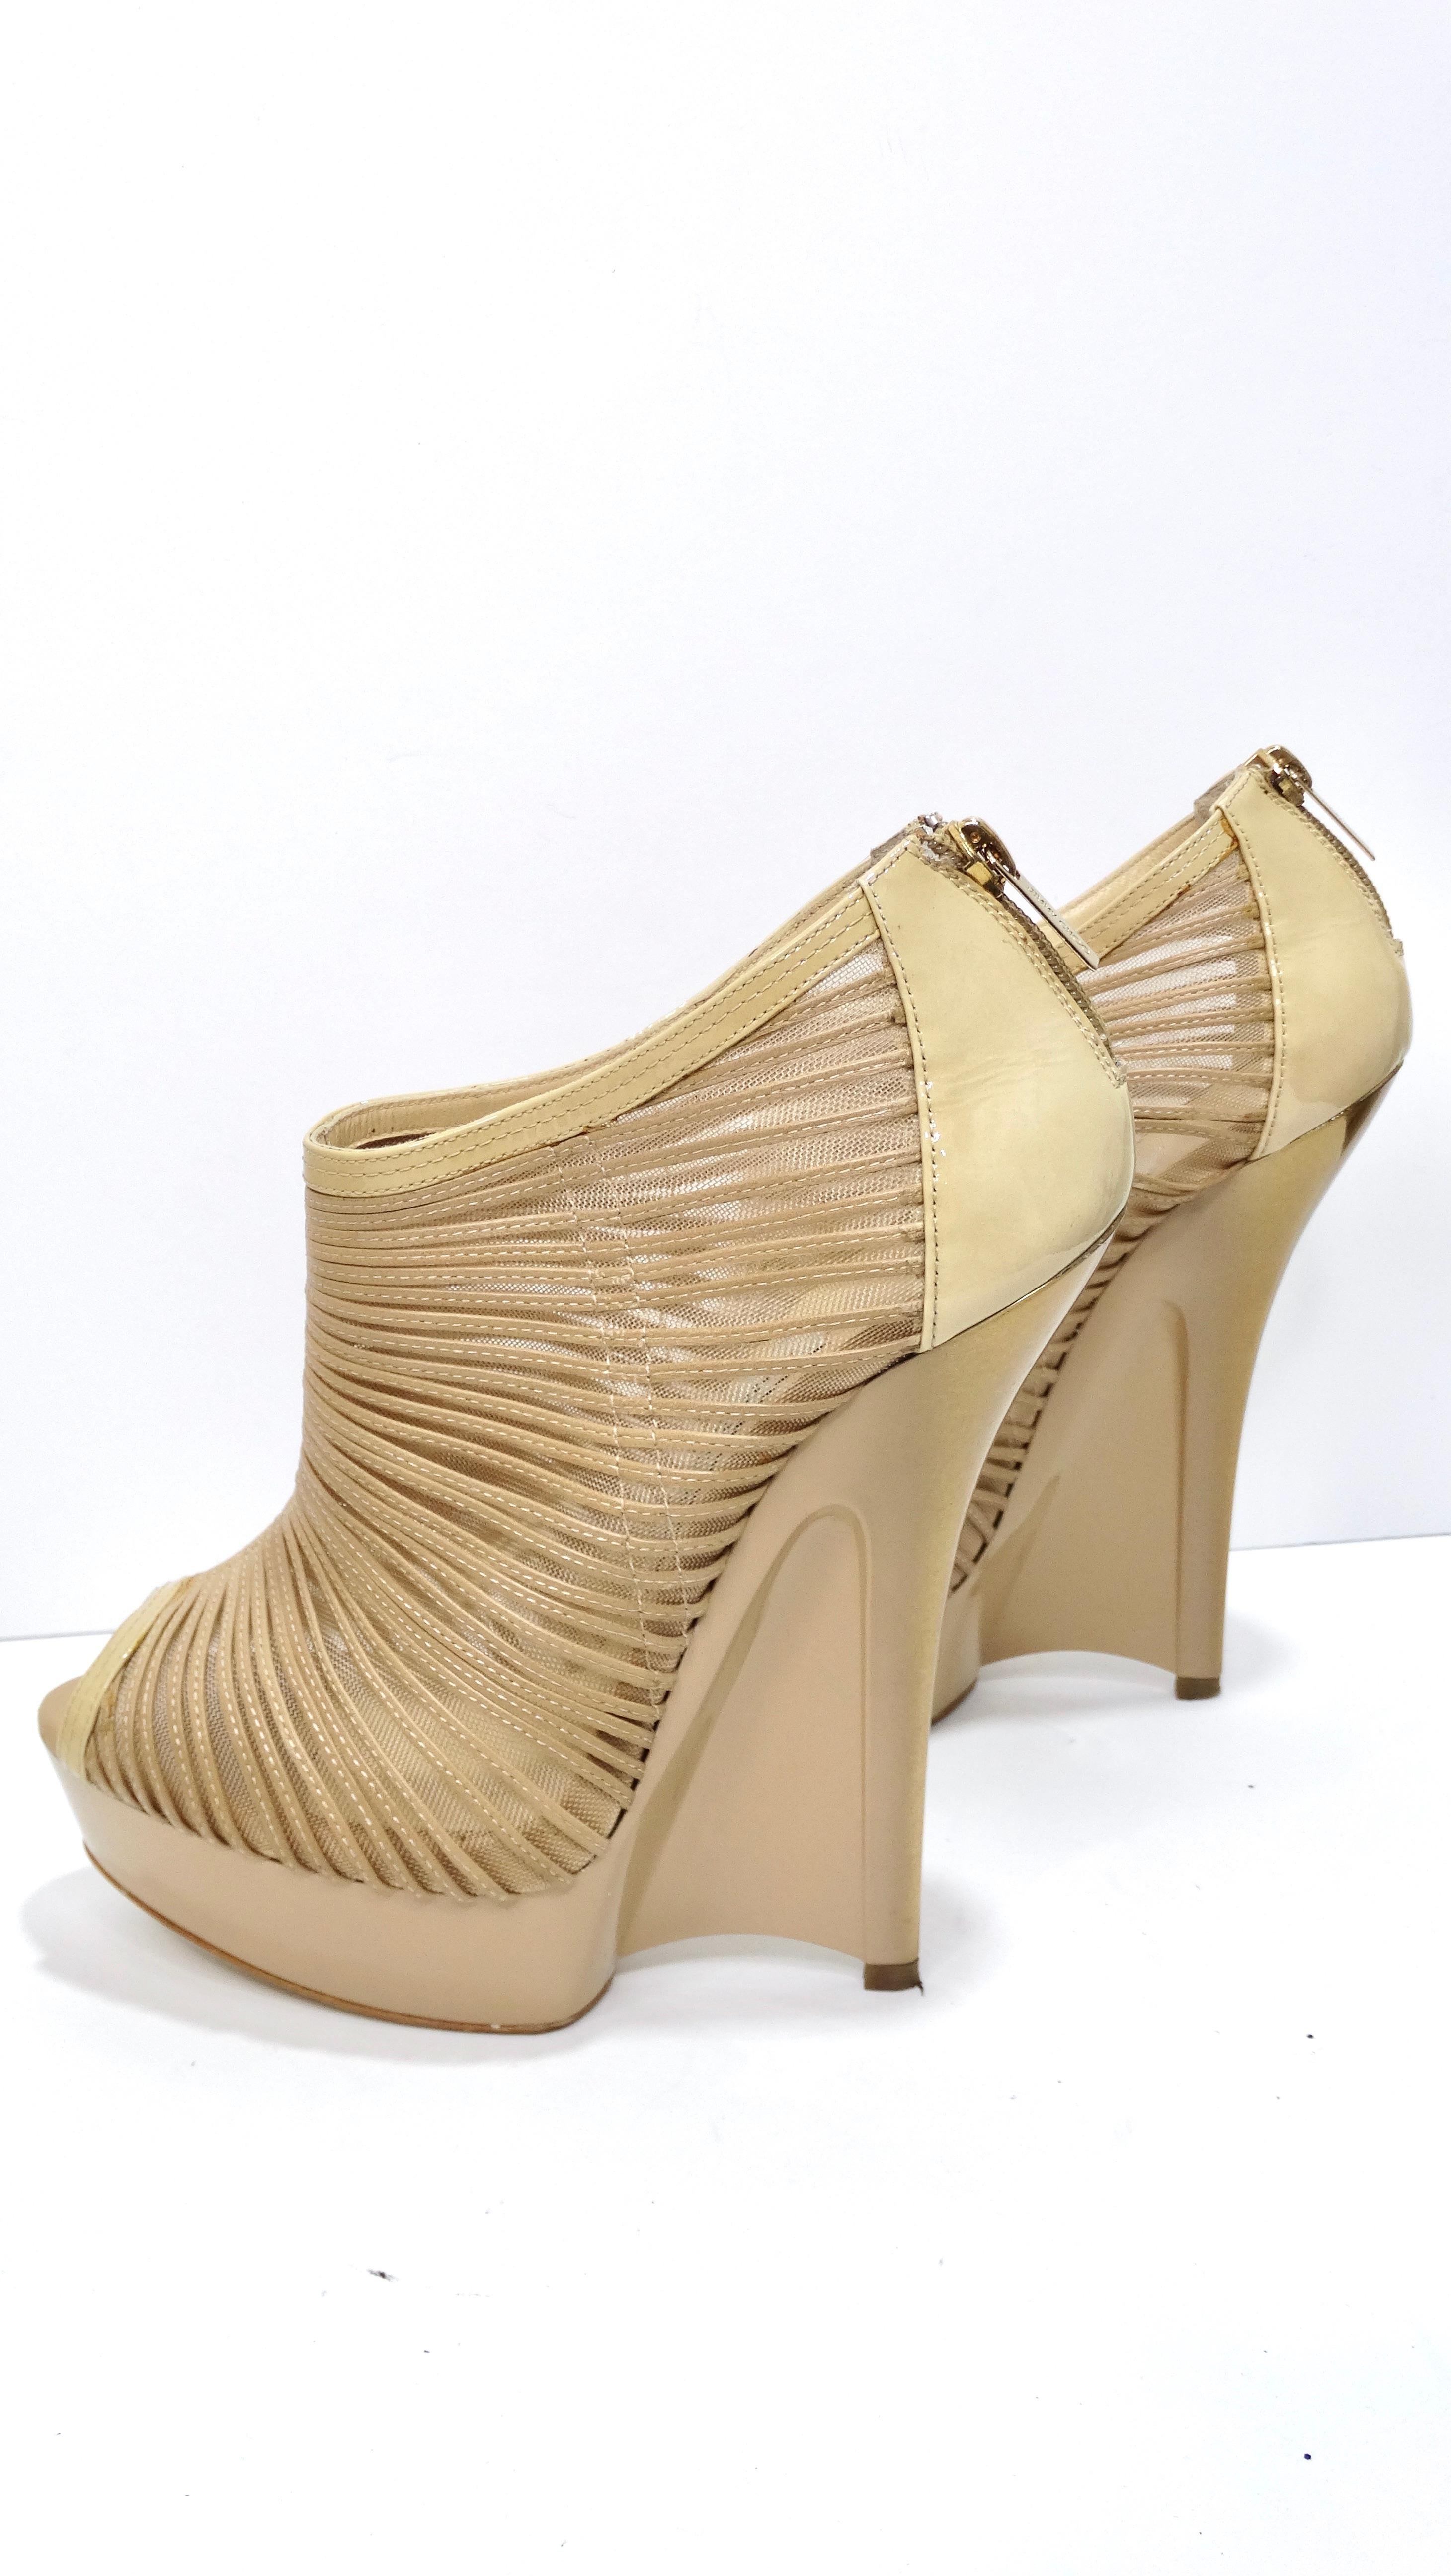 Jimmy Choo Nude Ellie Patent Leather Booties In Good Condition For Sale In Scottsdale, AZ